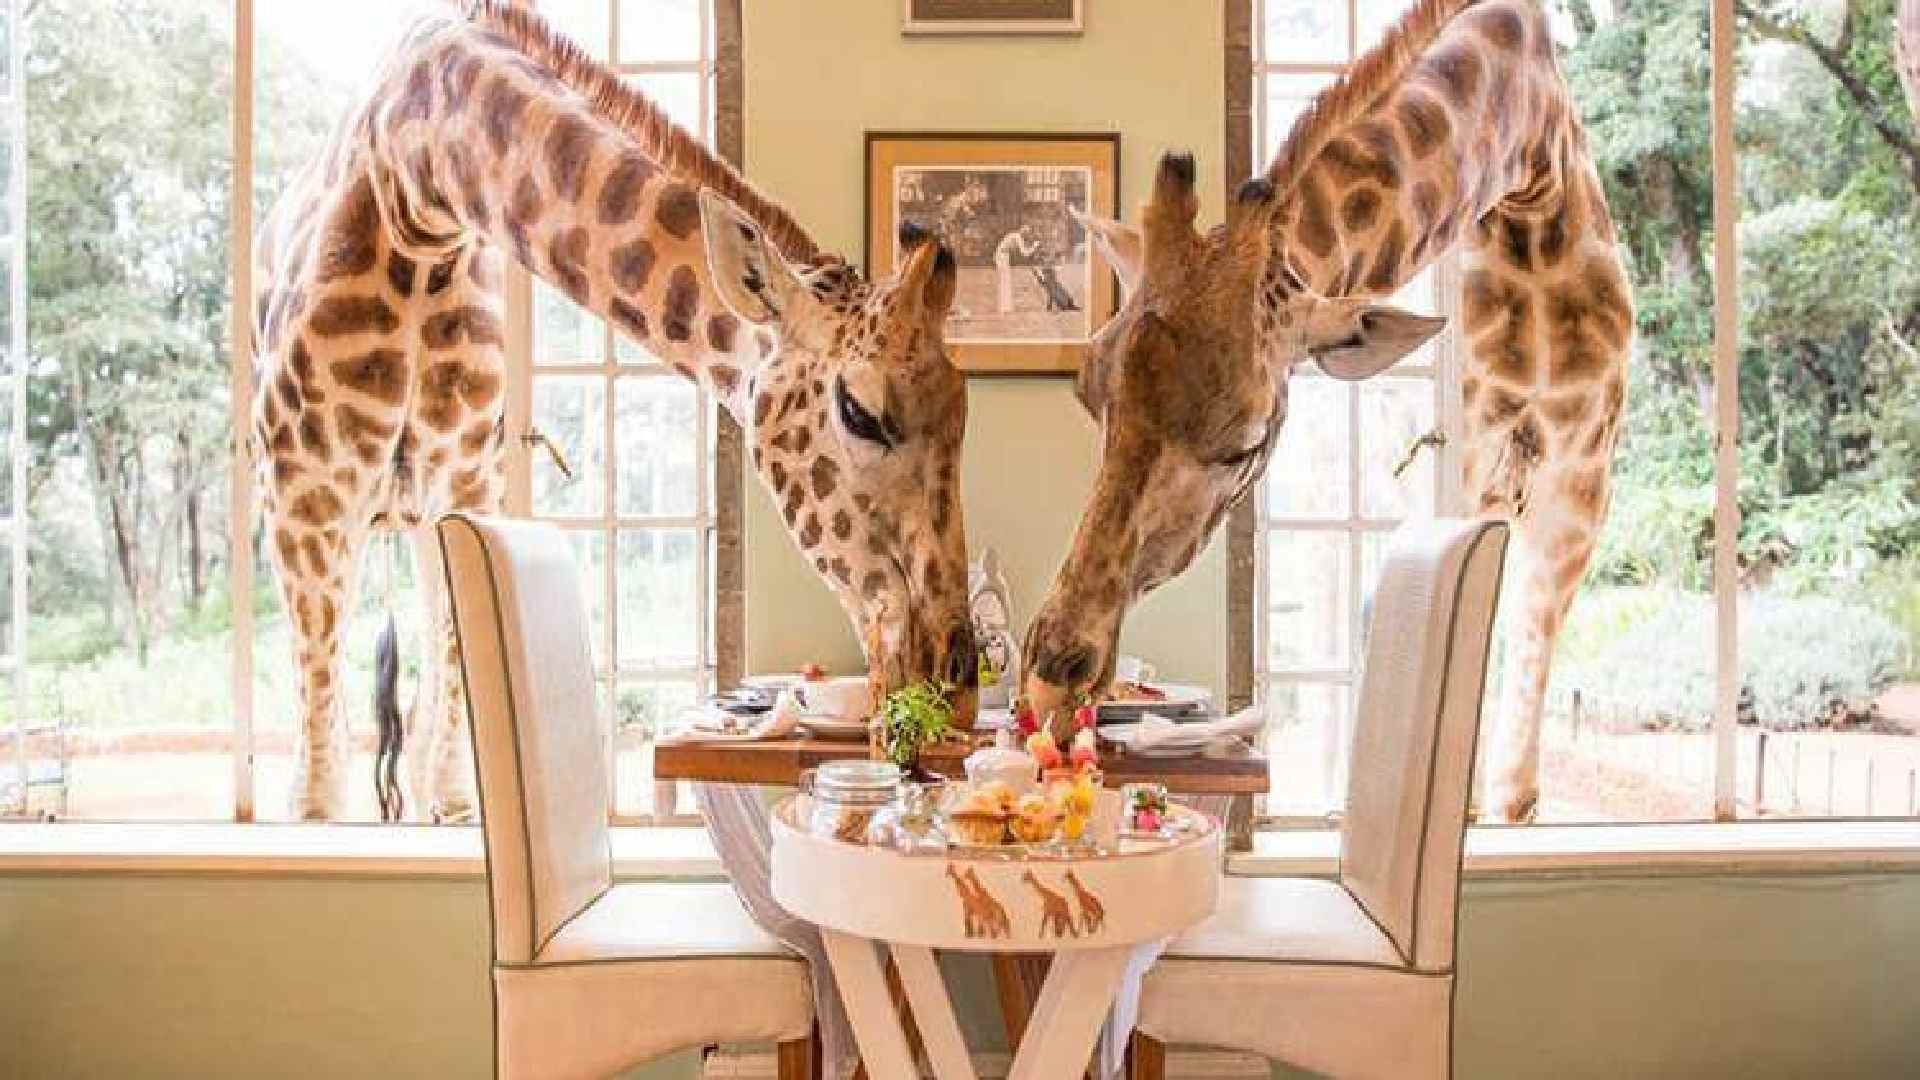 You are currently viewing A Guide Through Giraffe Castle in Kenya